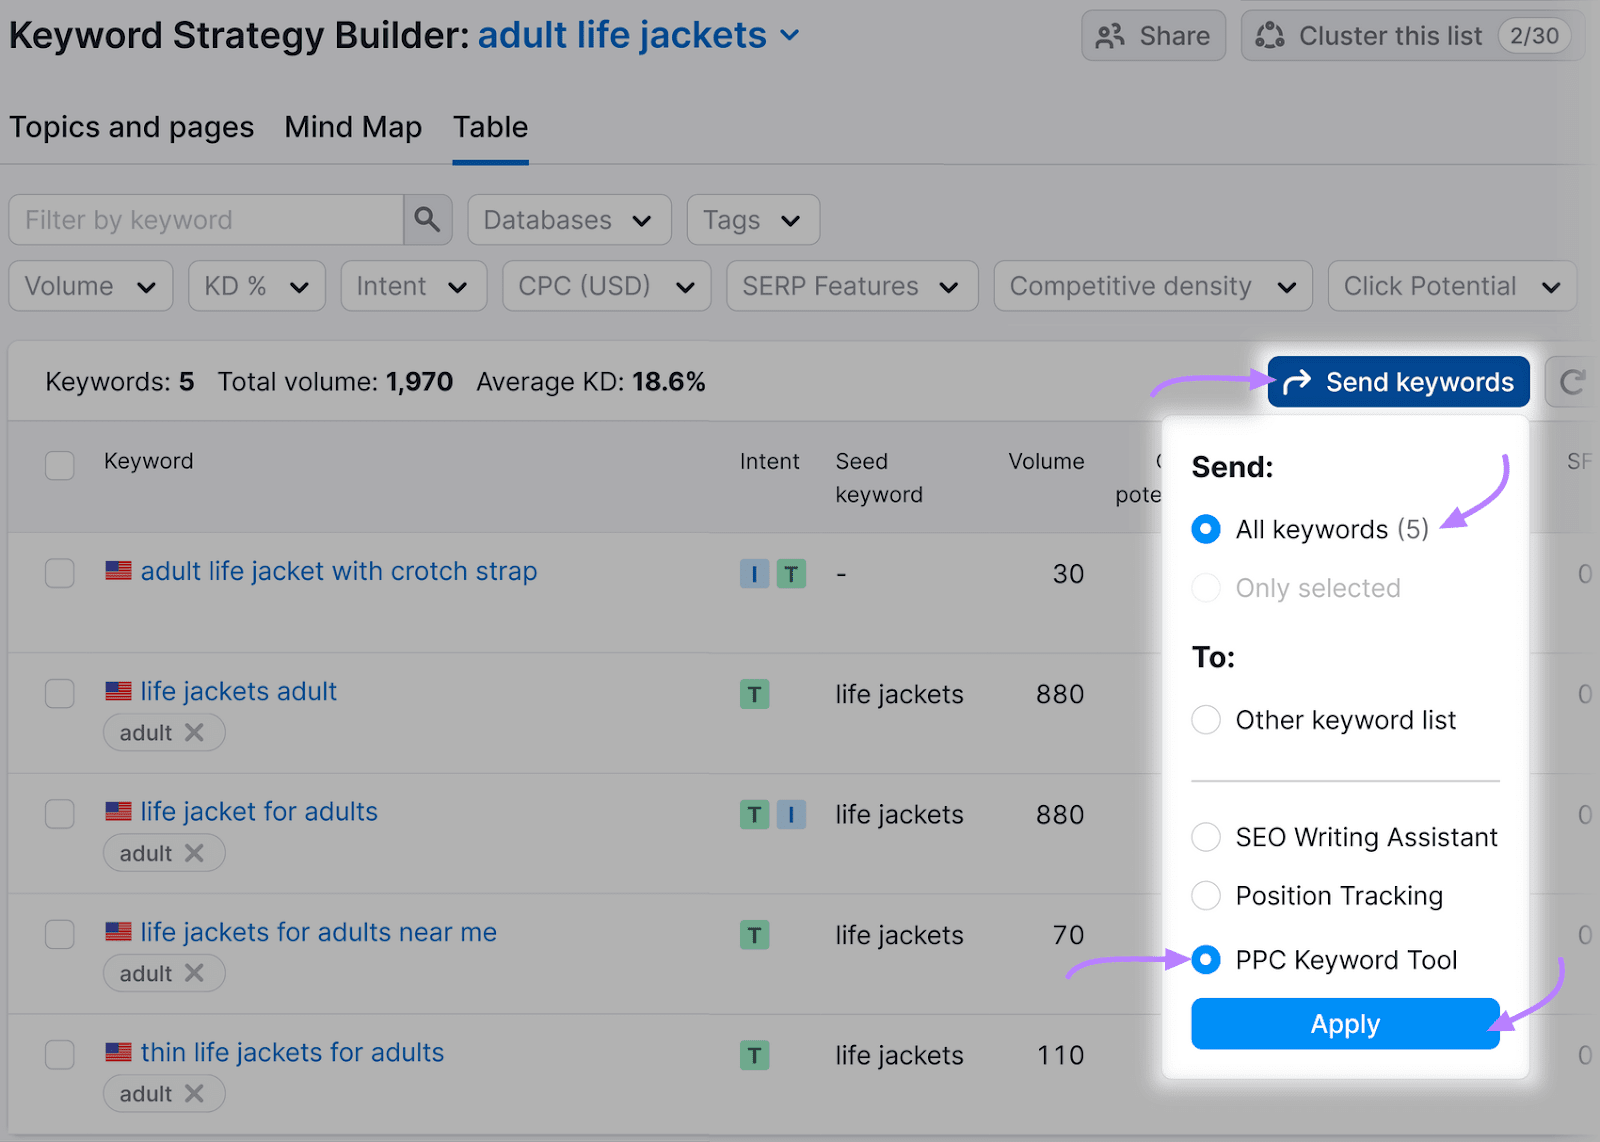 Keyword Strategy Builder displaying various keywords with a sidebar for sending selected keywords to other tools.